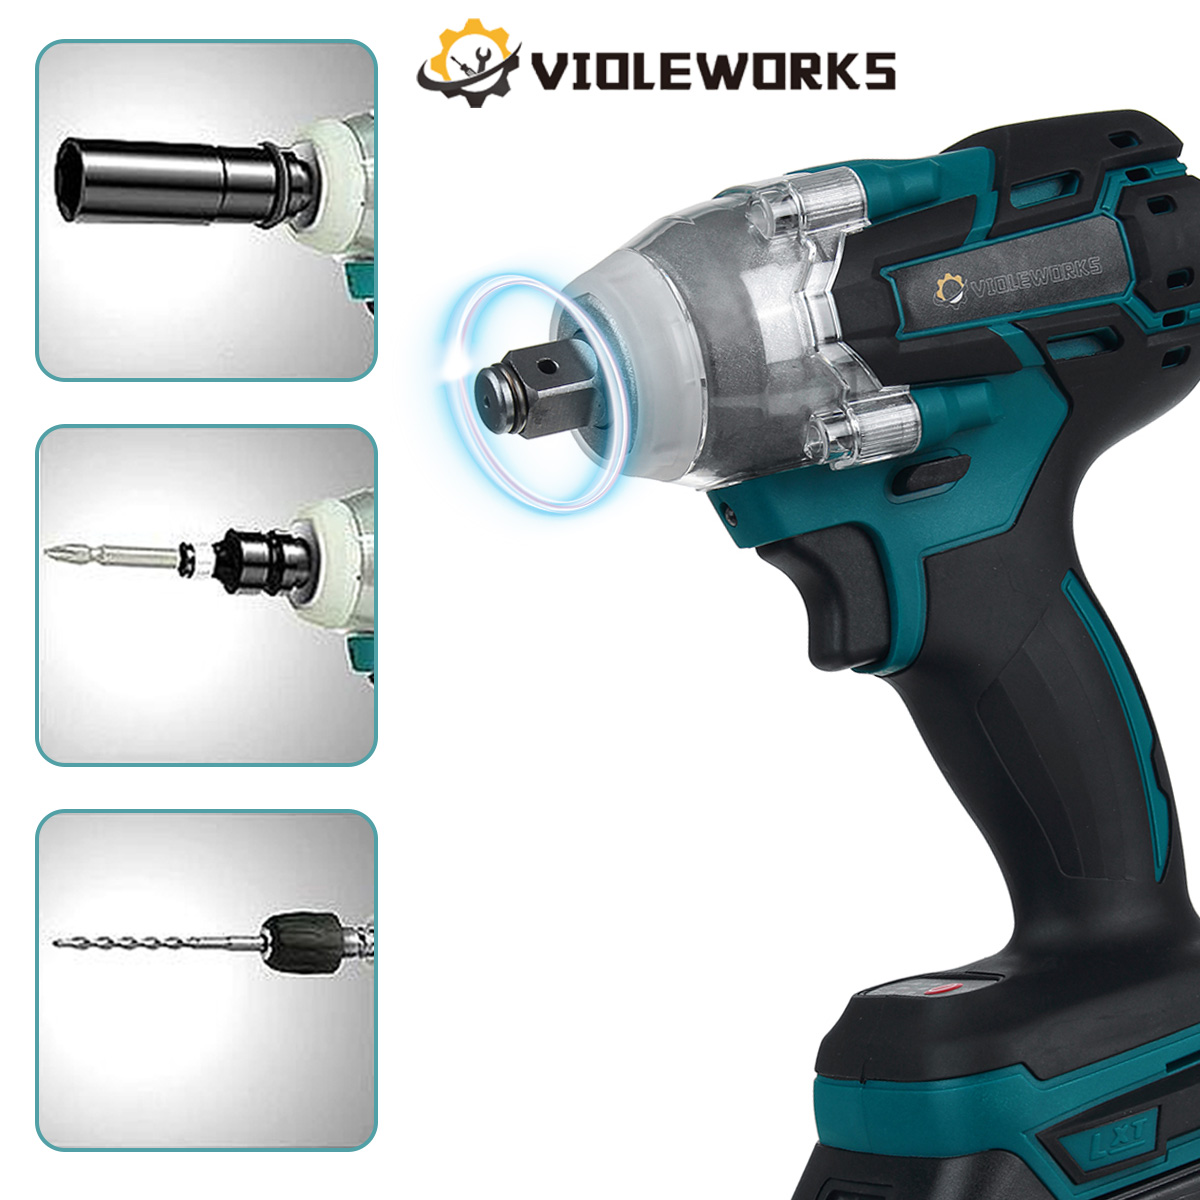 VIOLEWORKS-88VF-21V-280NM-1300mAh-Electric-Cordless-Impact-Wrench-Drill-Socket-W-1pc-or-2pcs-Battery-1791133-3